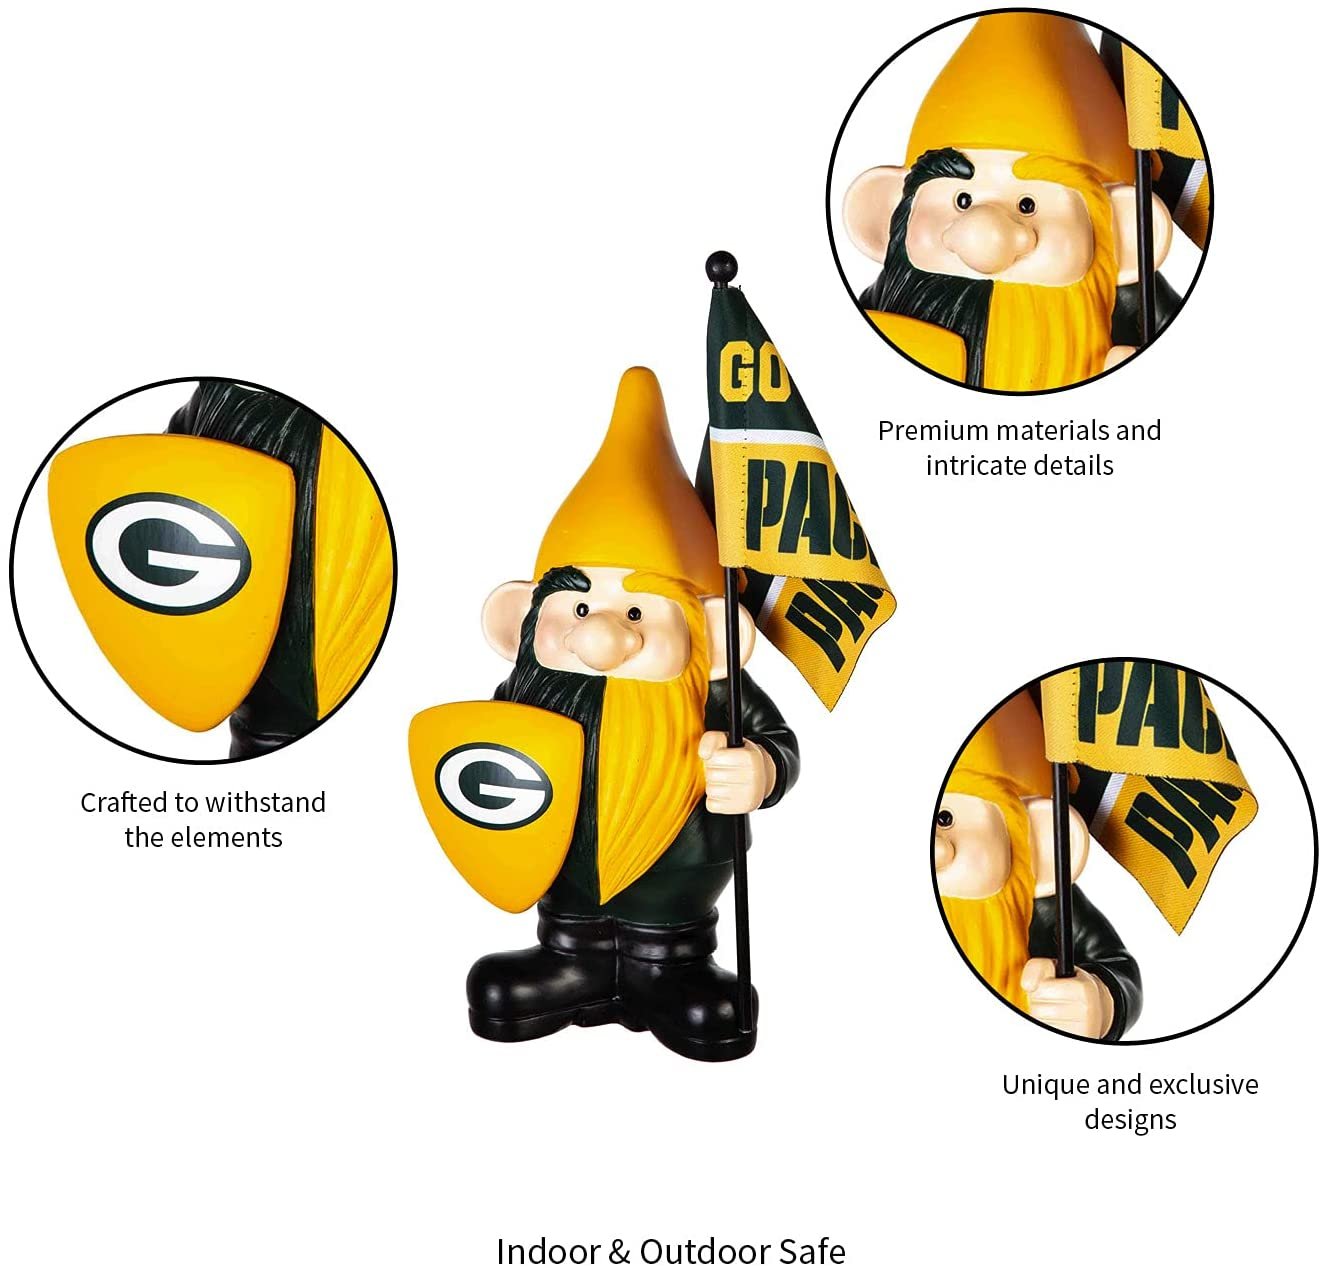 Green Bay Packers 10 Inch Outdoor Garden Gnome, Includes Team Flag